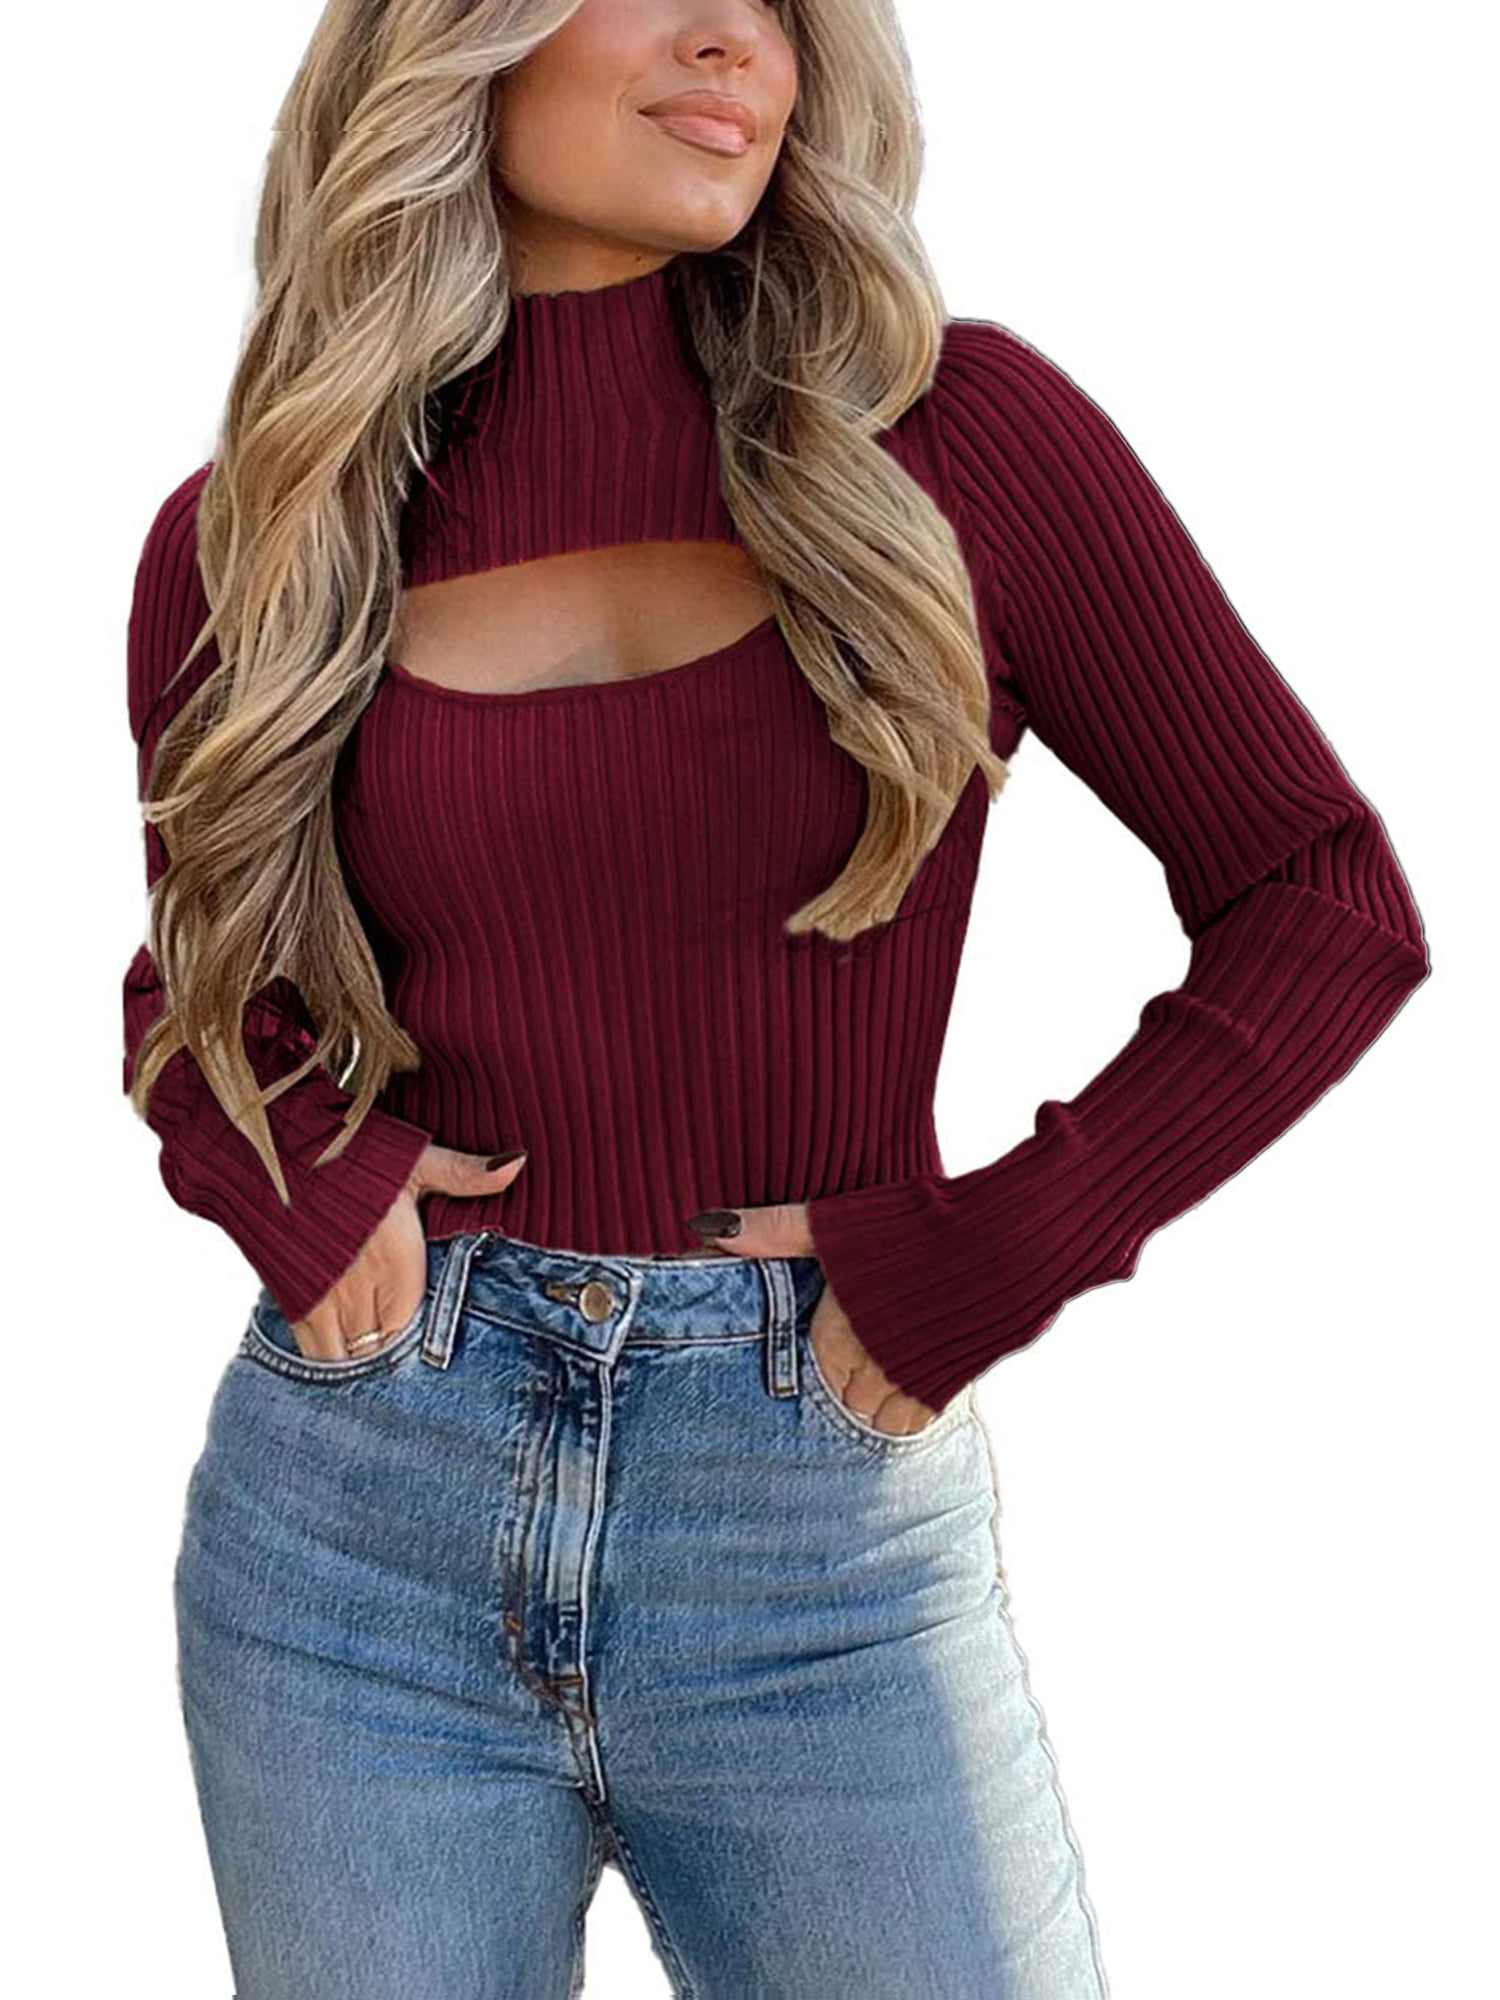 Women's 2 Piece Cutout Tops Halter Cami Tops and Flare Sleeve Crop Top  Shrug Set Rib Knit Fitted Pullover Sweater (Beige, S) at  Women's  Clothing store